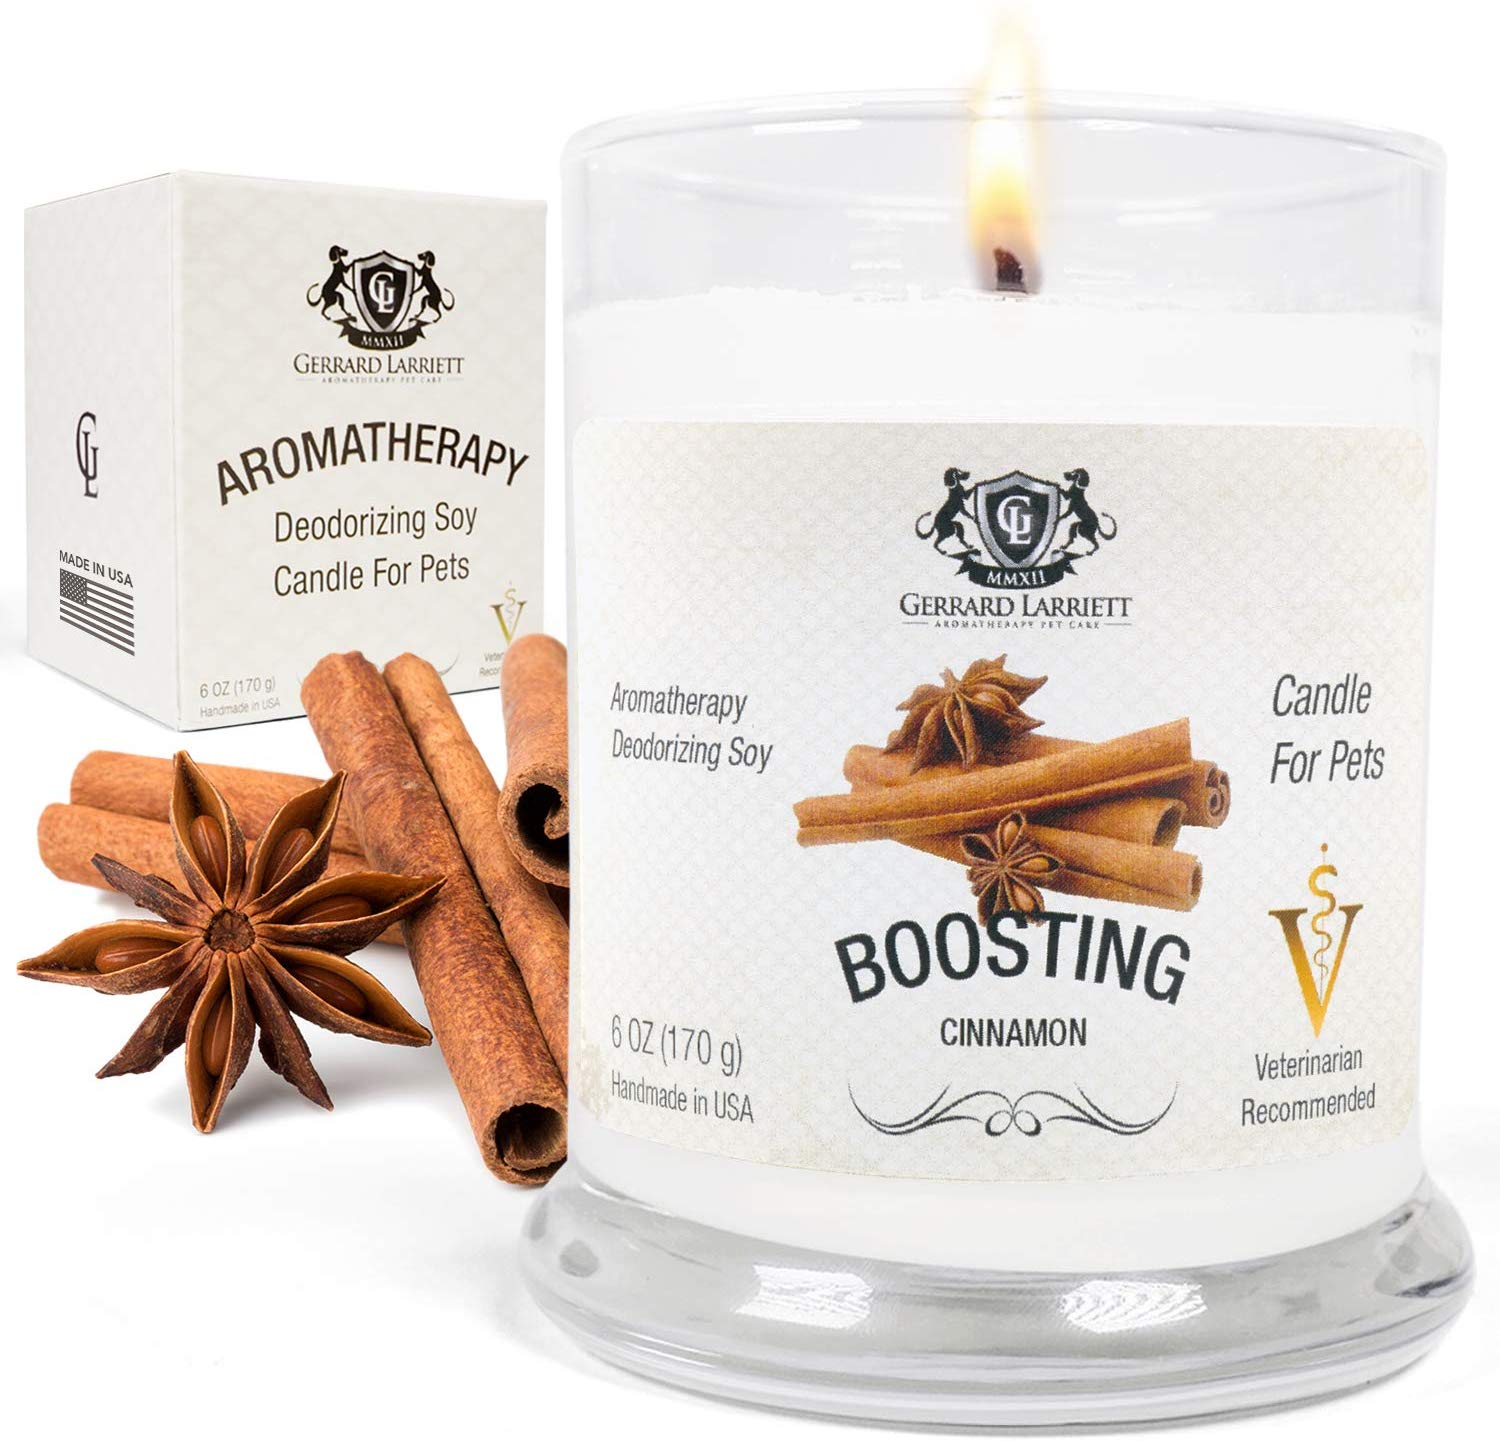 Aromatherapy Deodorizing Soy Candle for Pets